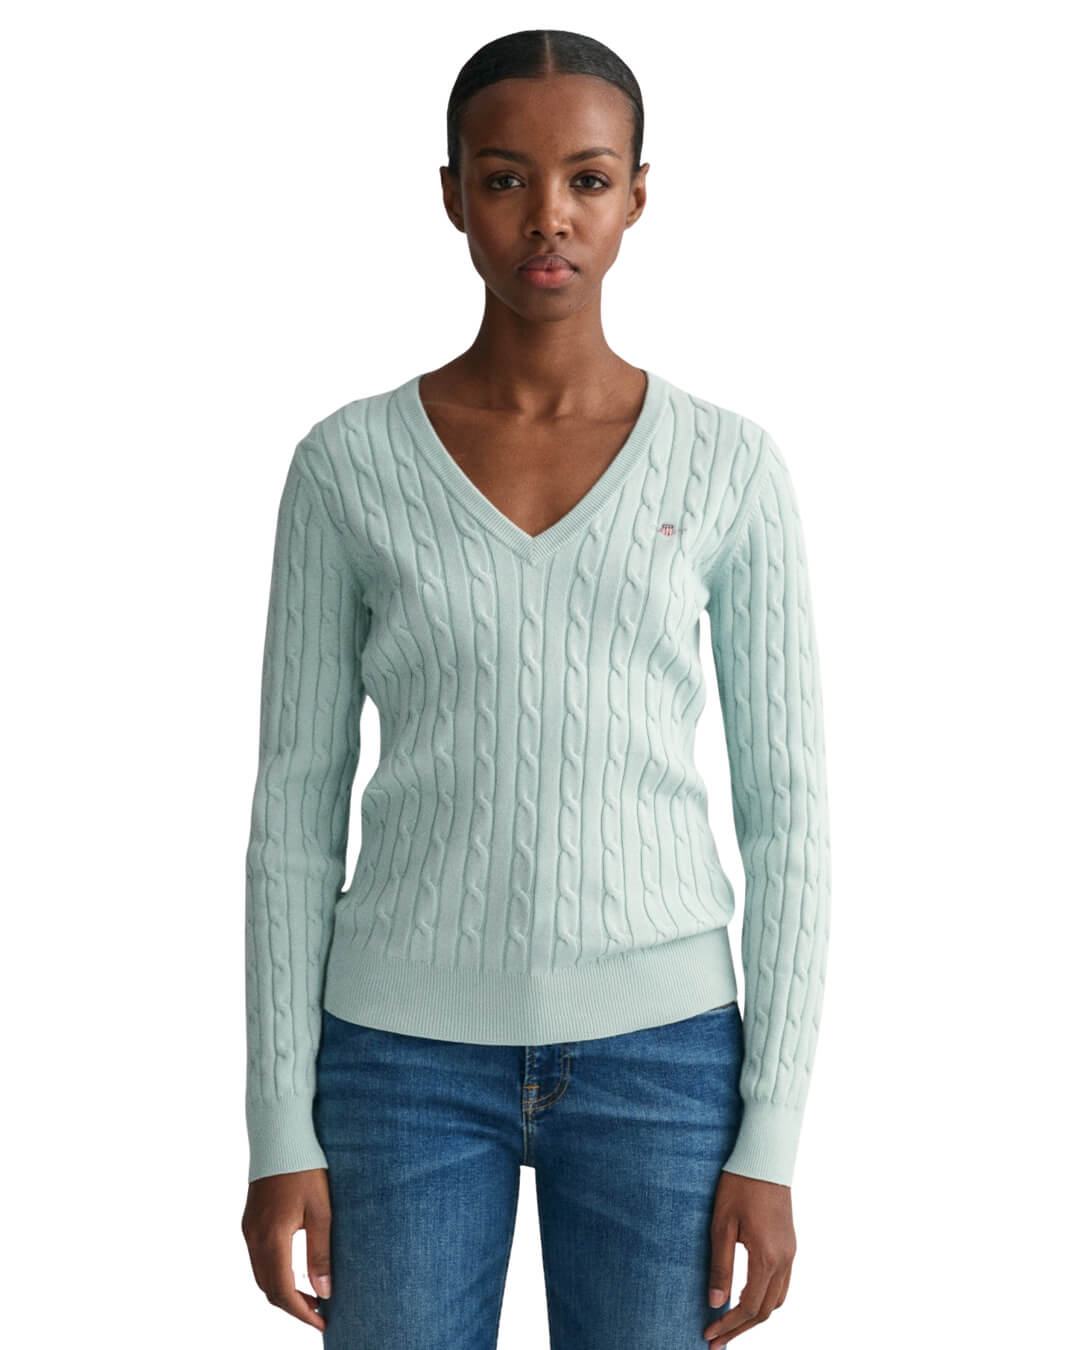 Gant Jumpers Gant Dusty Turquoise Stretch Cotton Cable Knit V-Neck Sweater